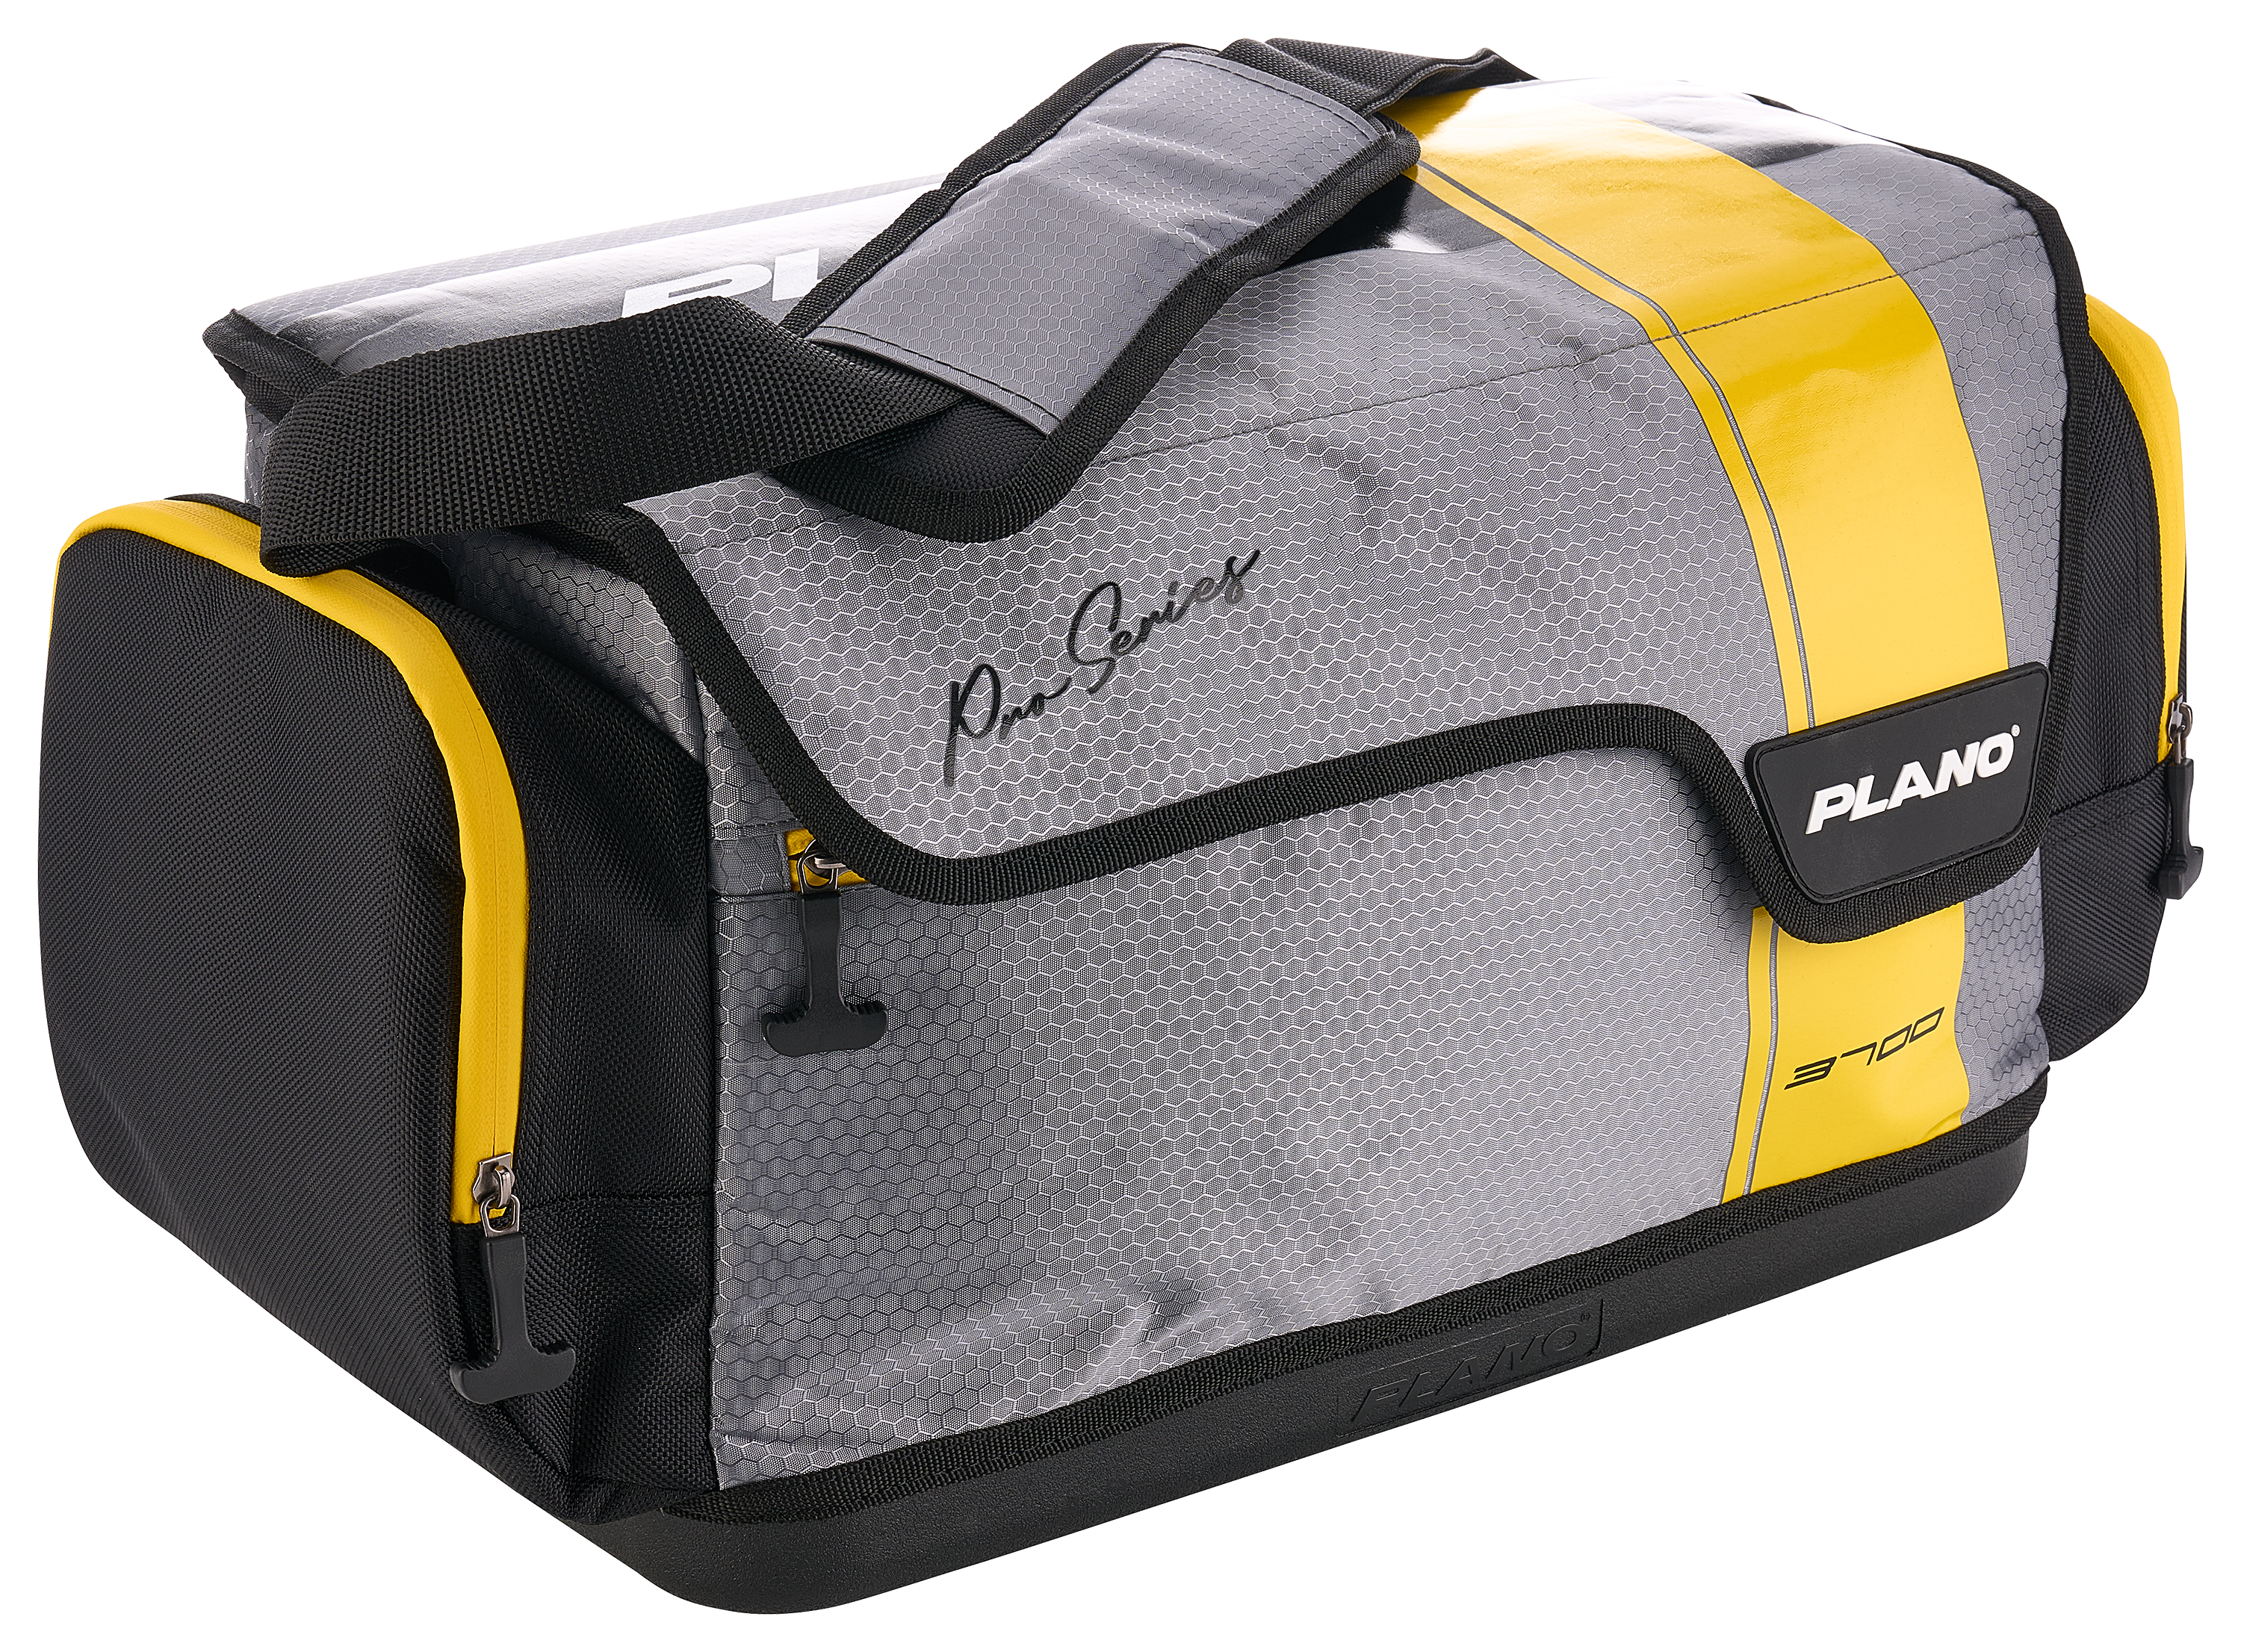 Bass Pro Shops Deluxe Fisherman Series Tackle Bag